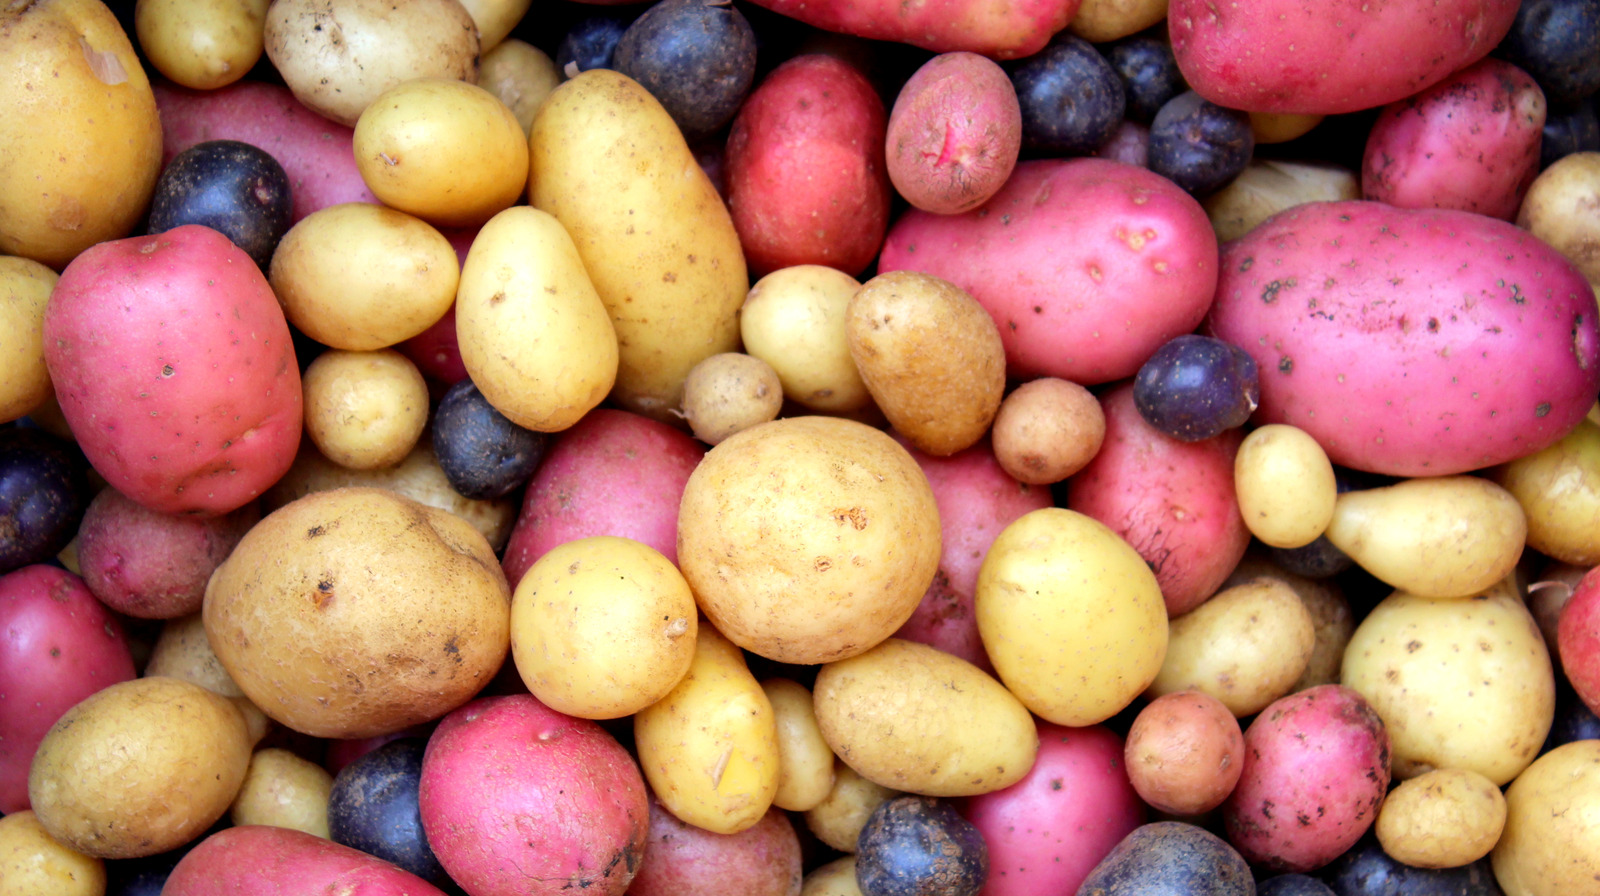 What Are Waxy Potatoes?